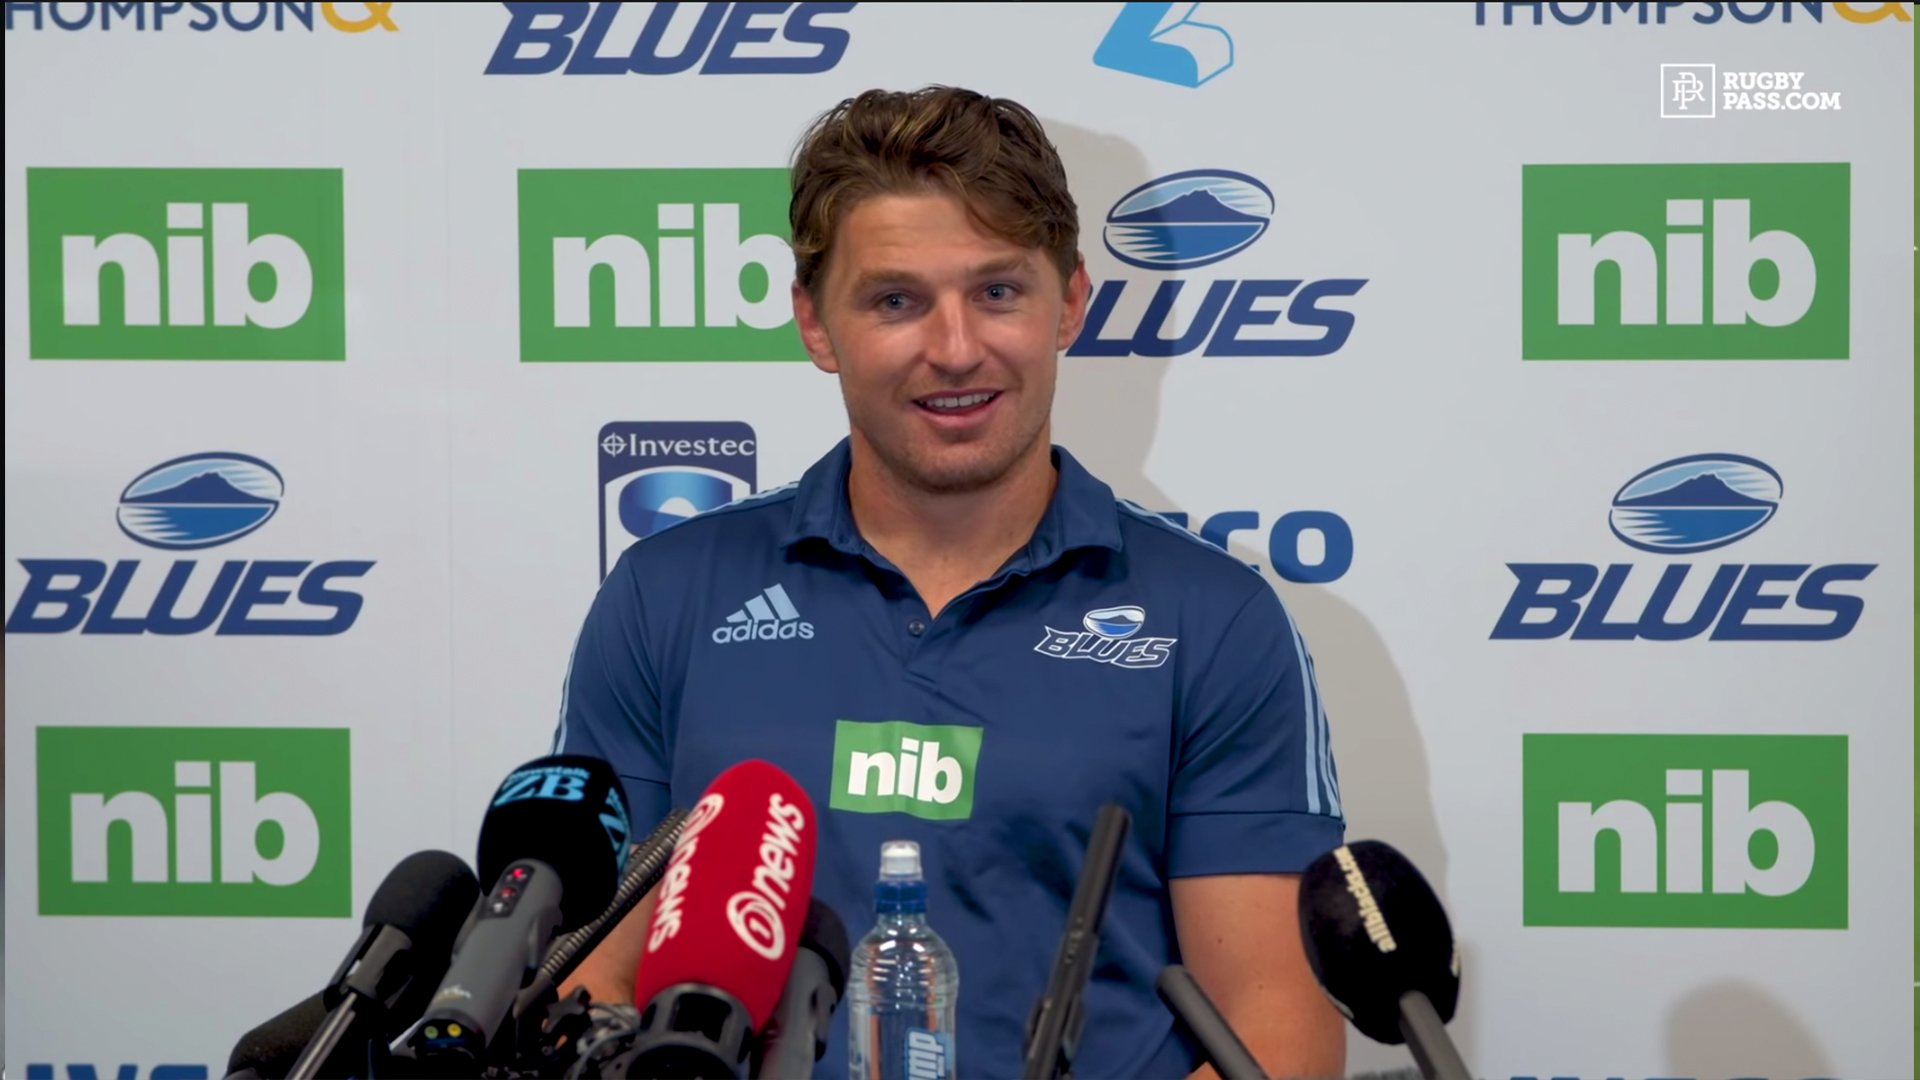 Beauden Barrett is visibly hyped that he gets to play with Dan Carter again in press conference